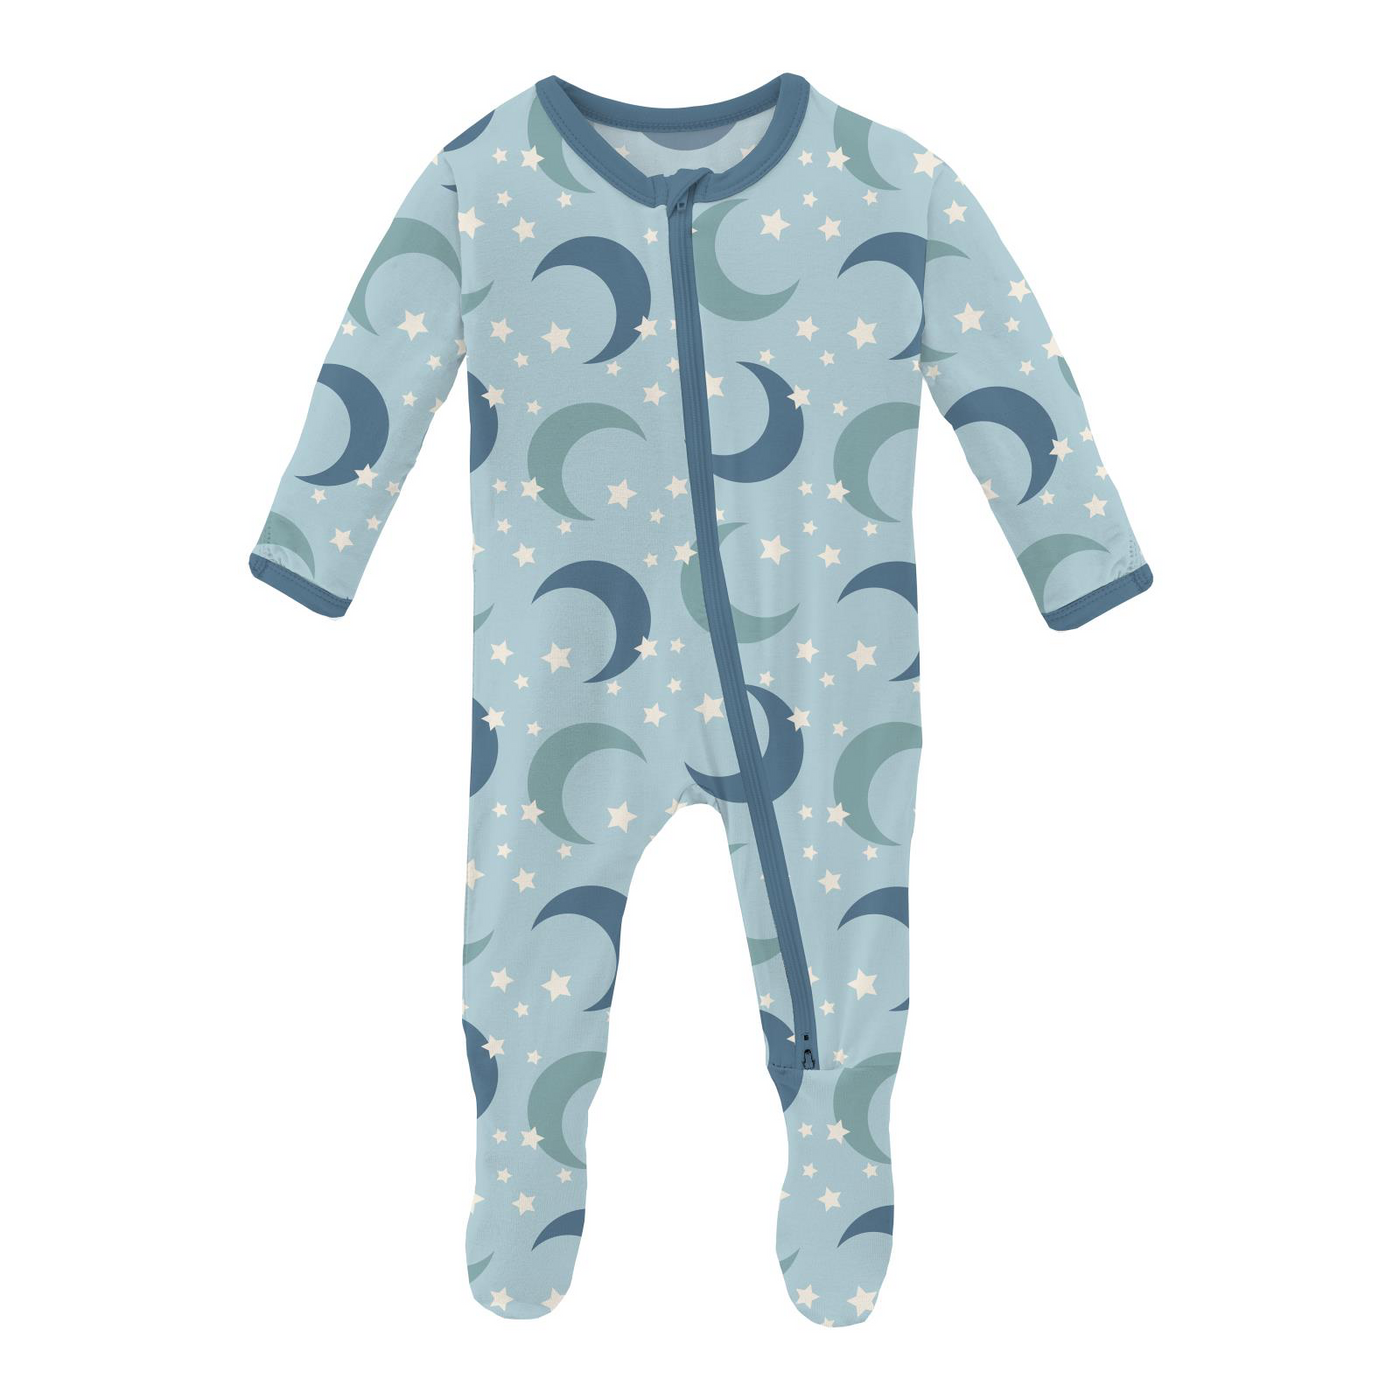 Kickee Pants Footie with 2 Way Zipper: Spring Sky Moon and Stars